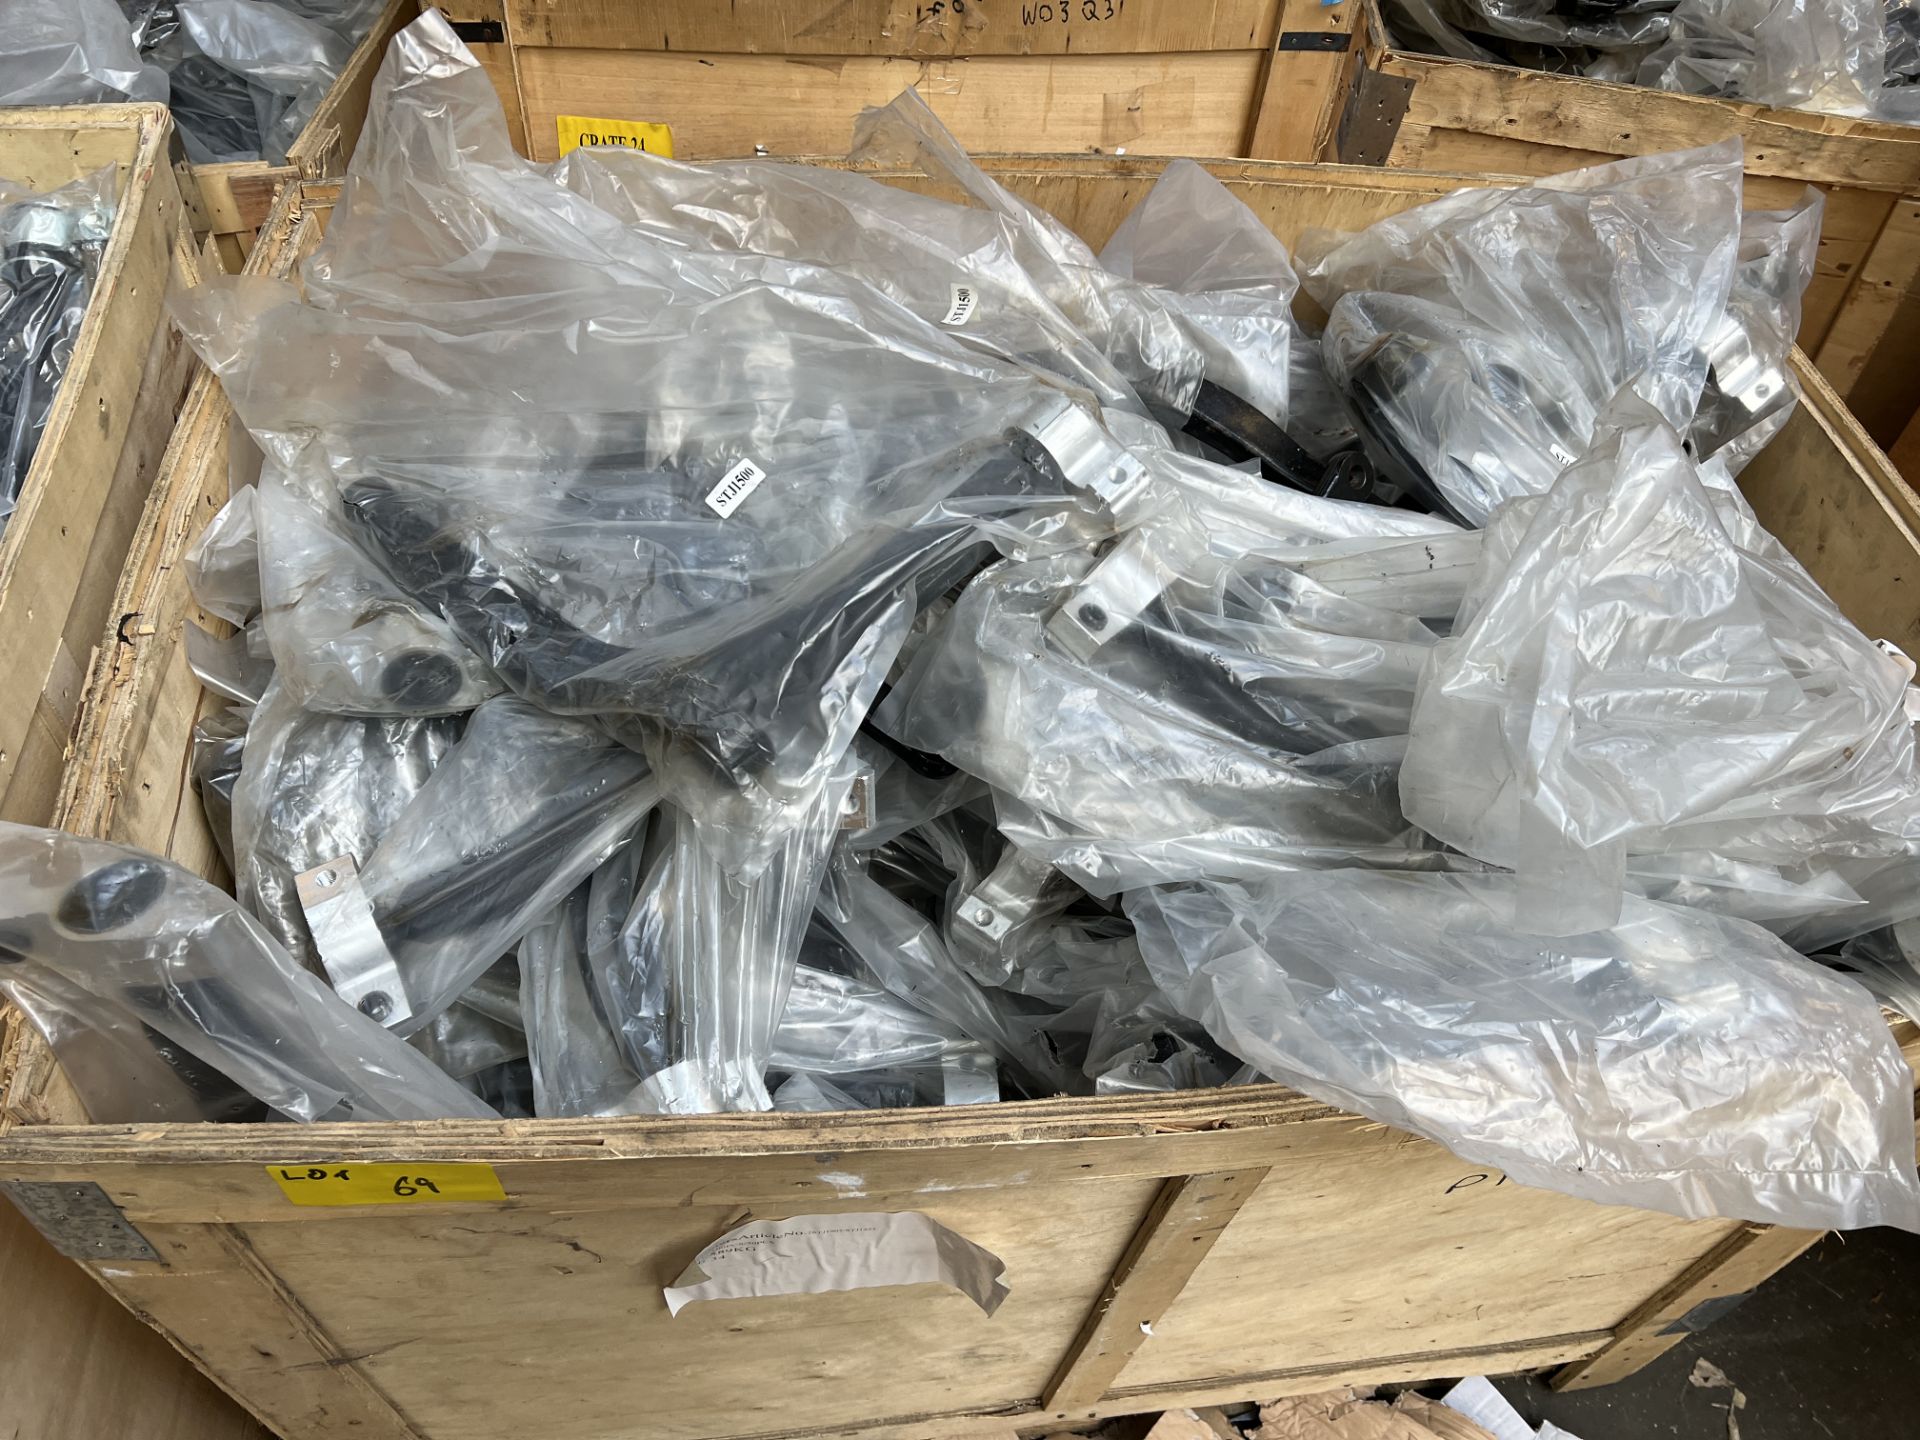 One Crate of approx 70 STJ1500 Steel Suspension Arms